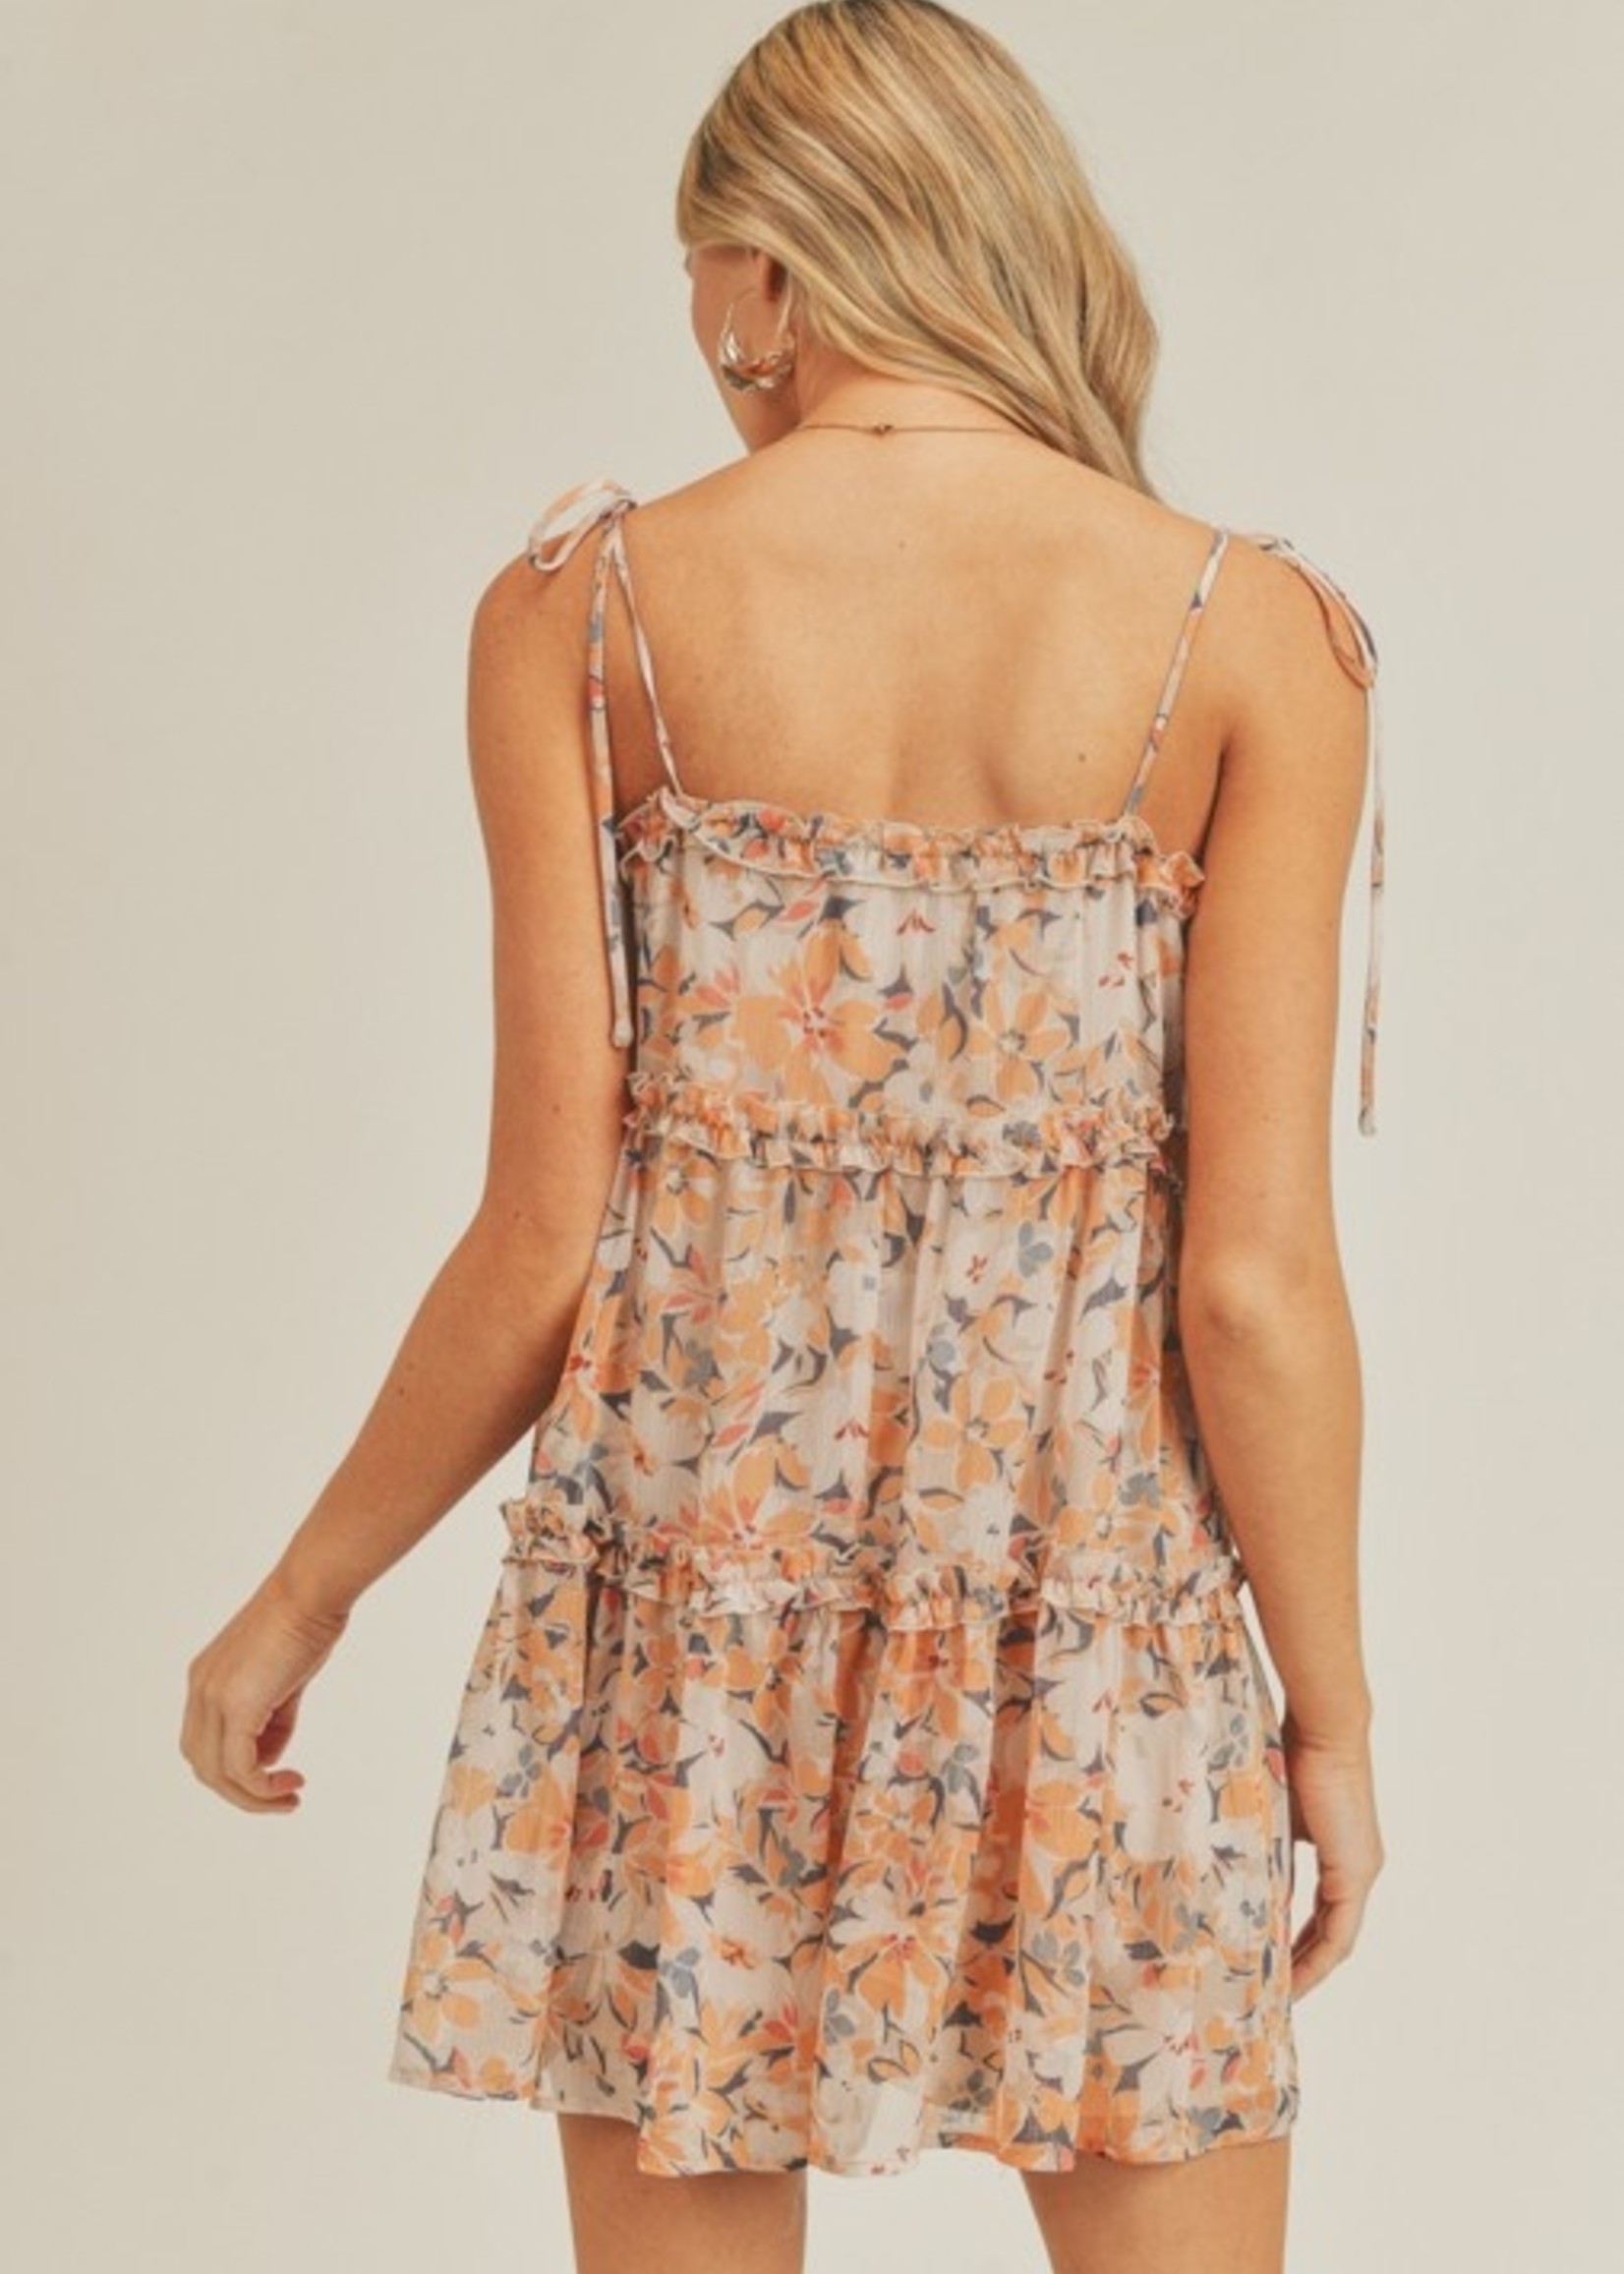 Tie Shoulder Ruffle Dress - Taupe Apricot